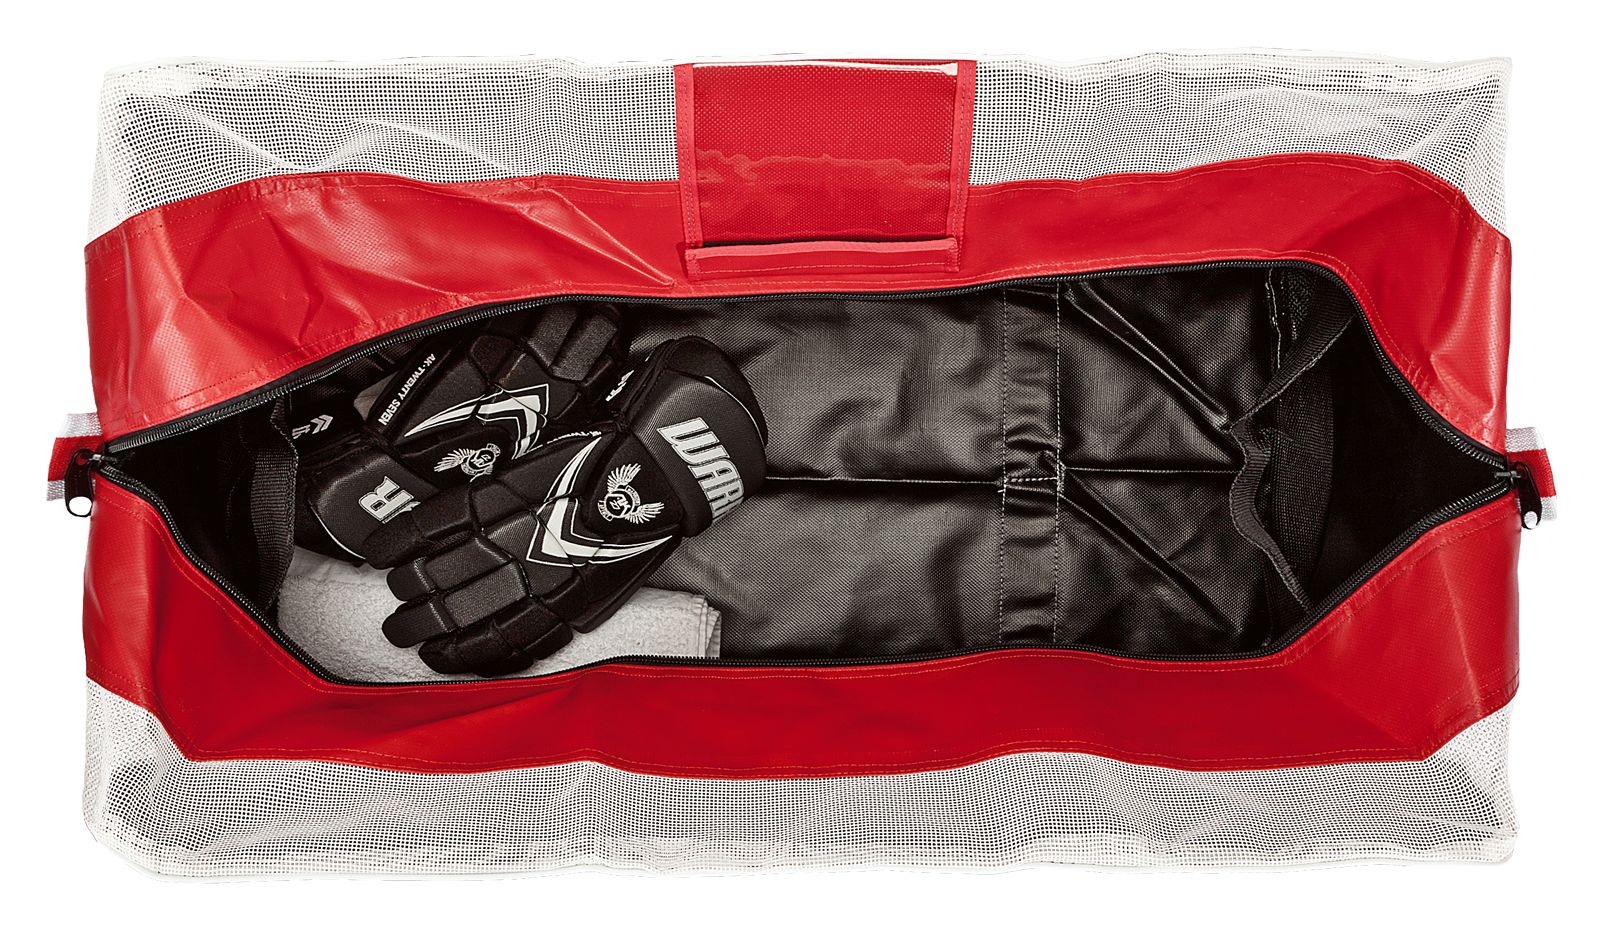 Warrior Pro Bag, Black with Red & White image number 3